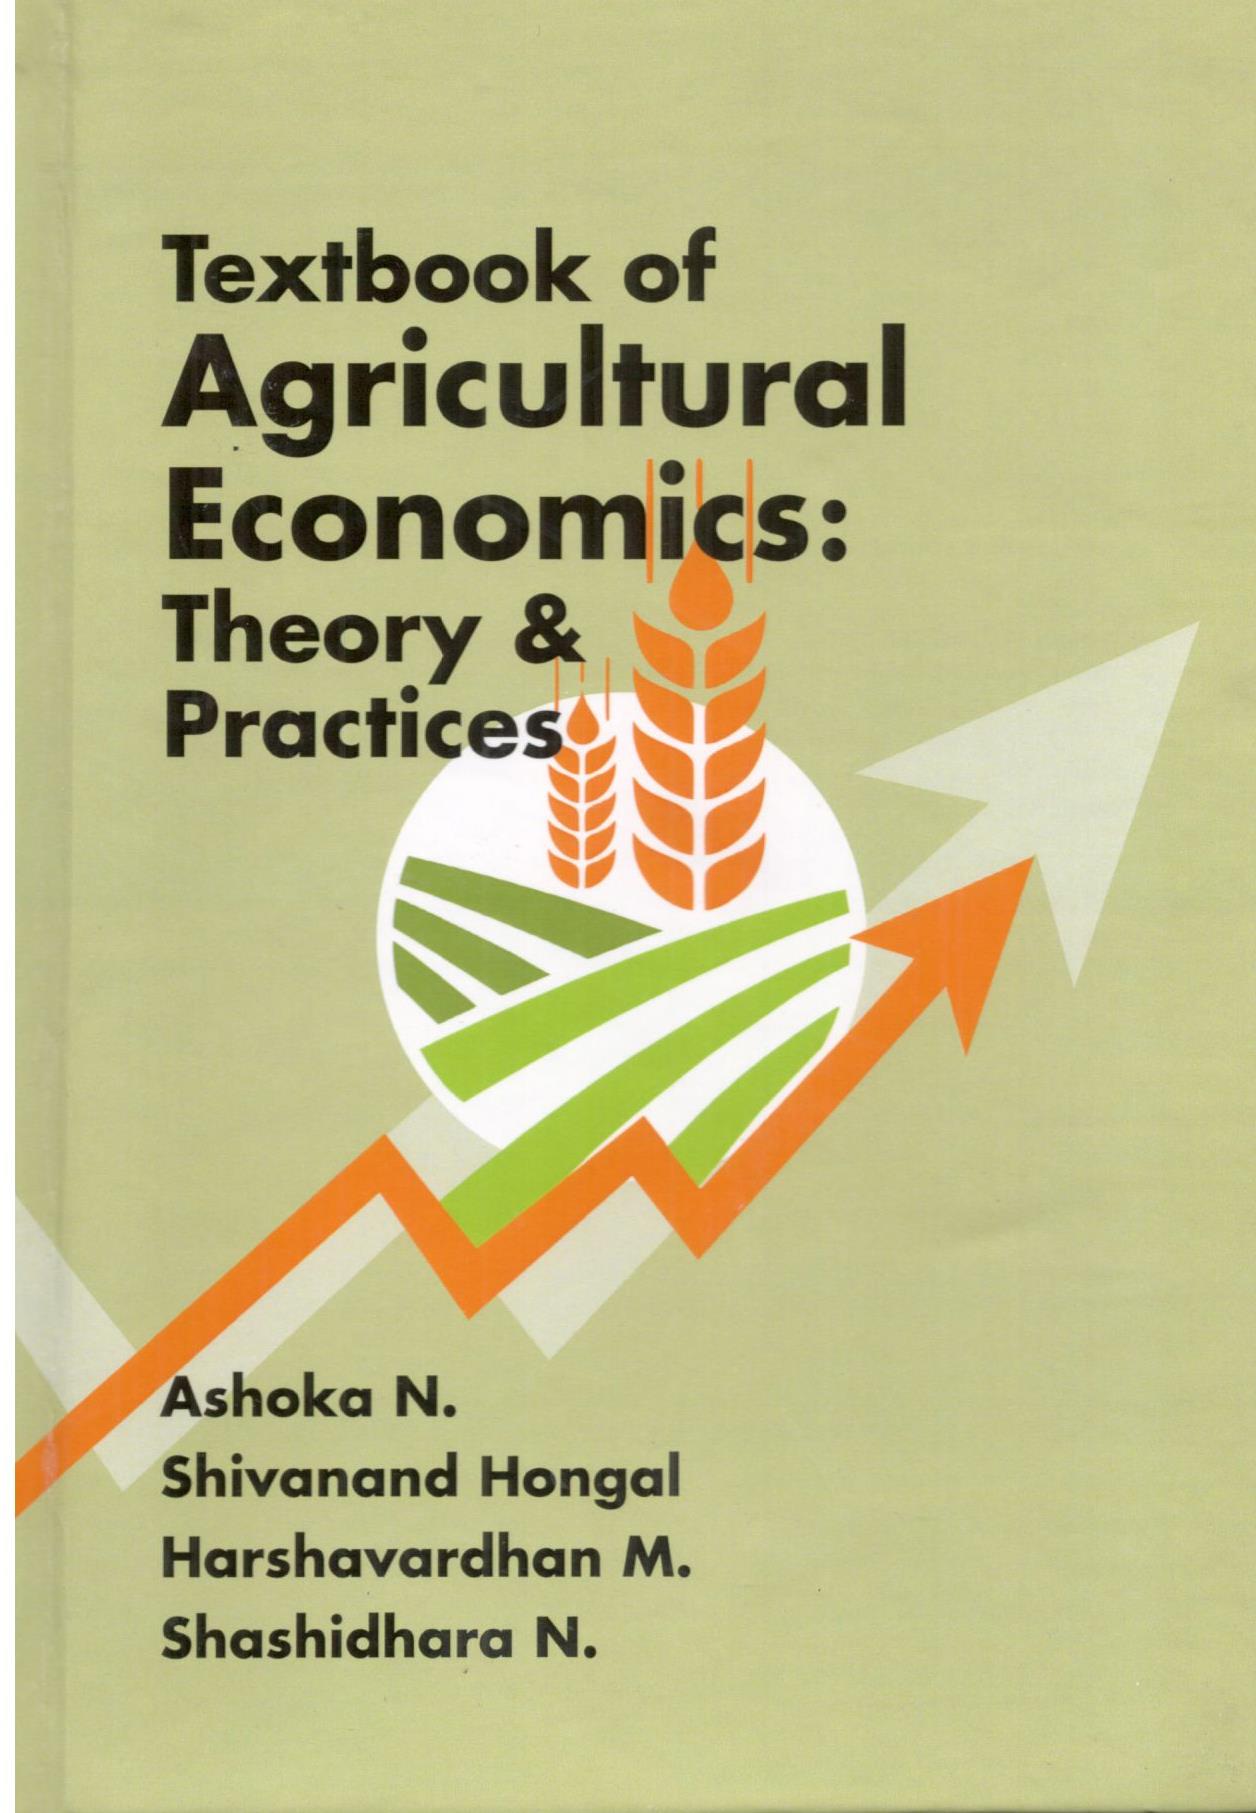 Textbook of Agricultural Economics: Theory & Practices